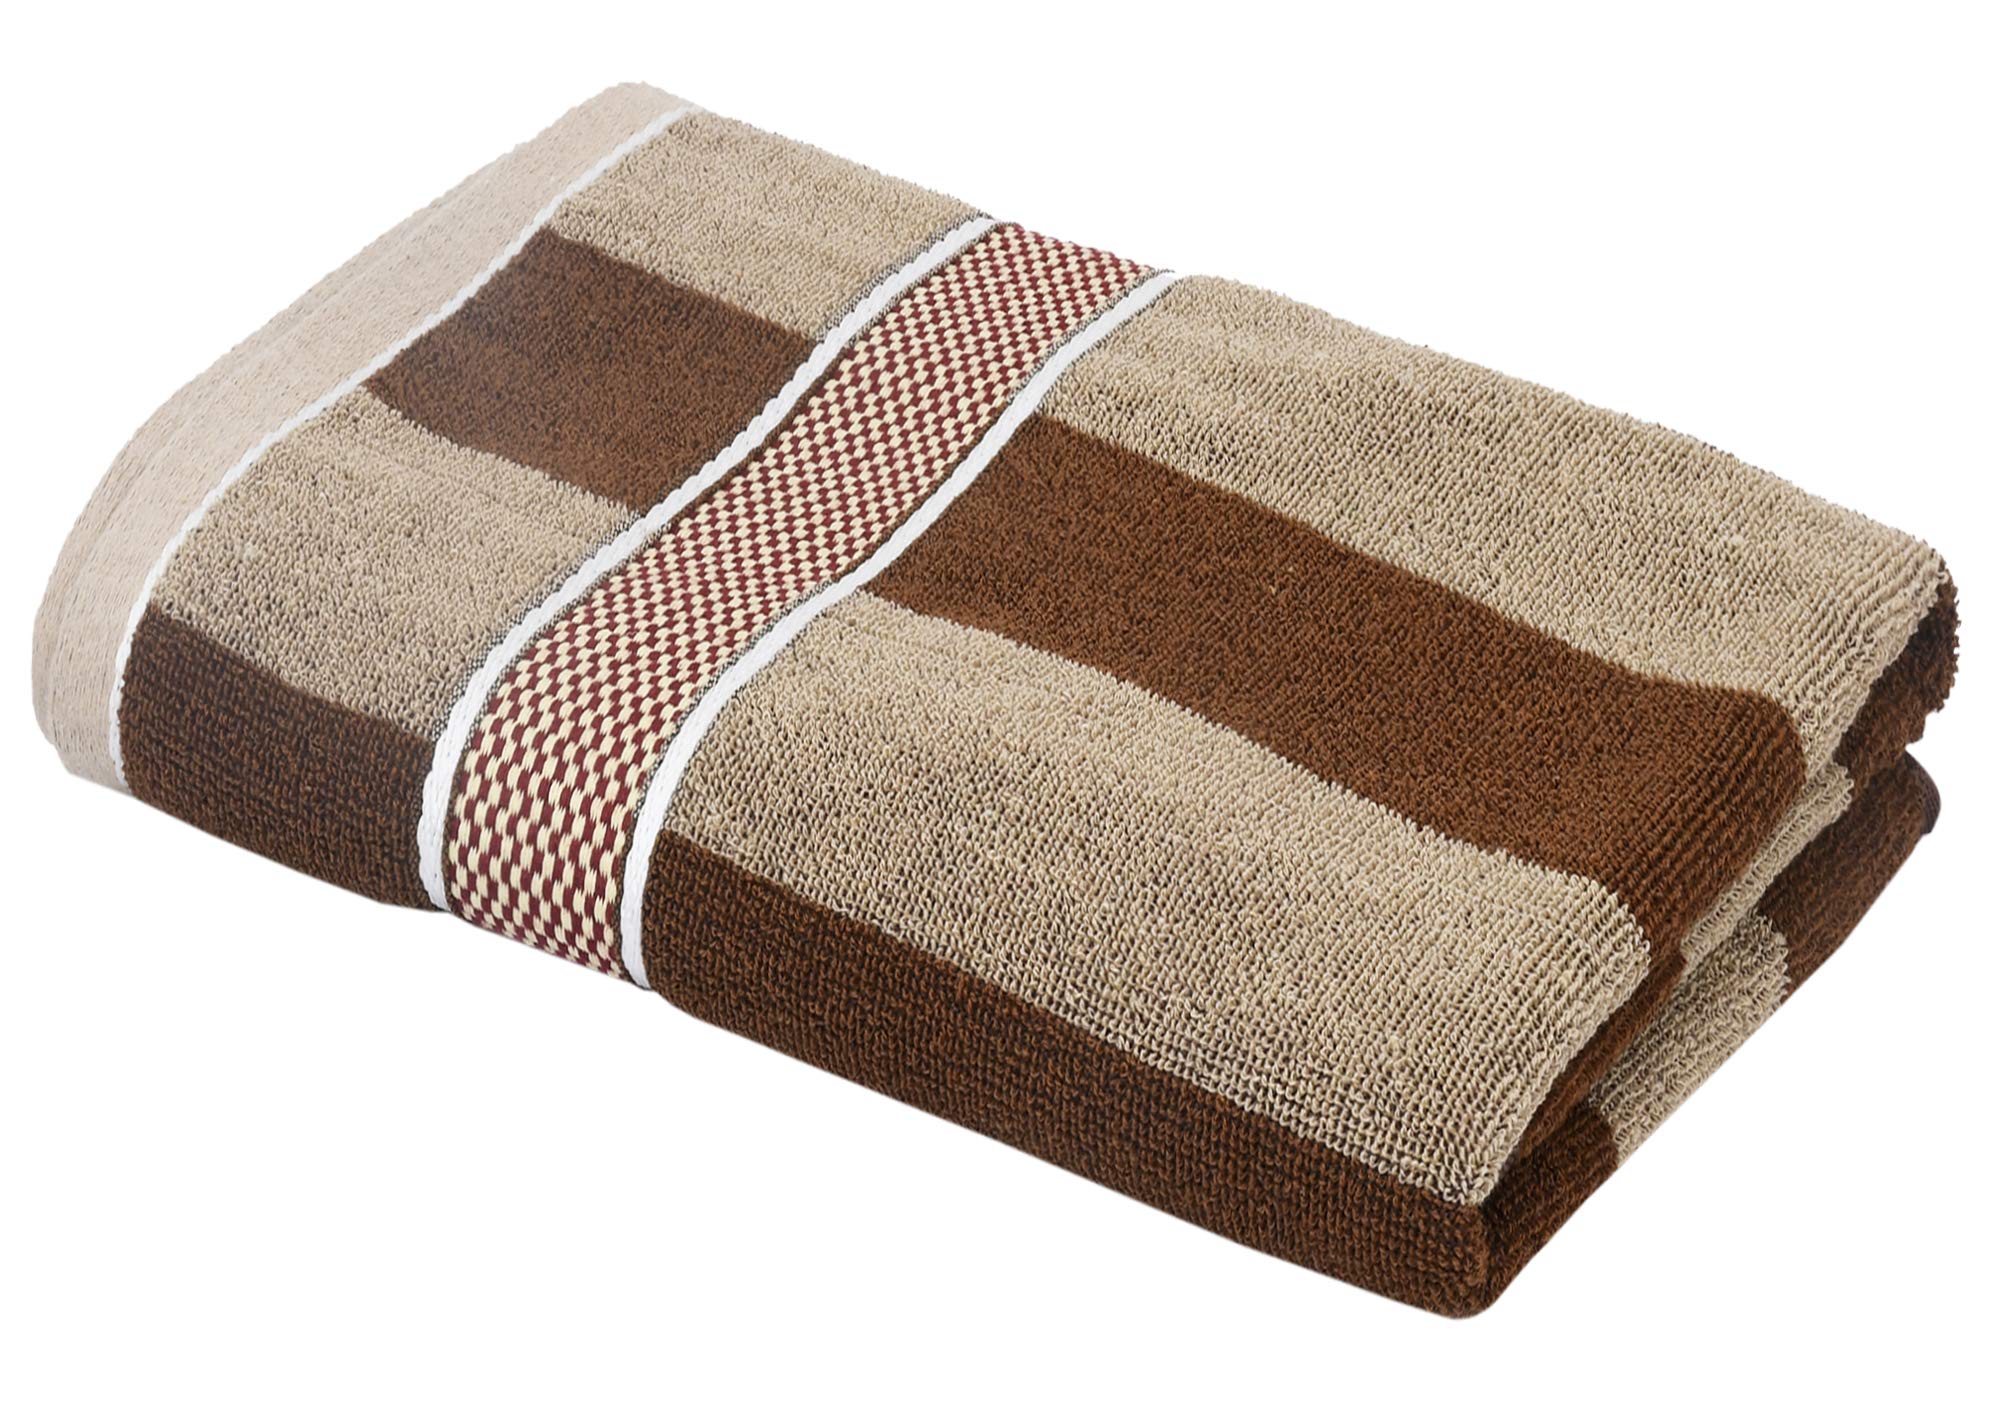 Kuber Industries Cotton 2 Pieces Bath Towel Super Soft, Fluffy, and Absorbent, Perfect for Daily Use 100% Cotton Towels, 500 GSM (Brown)-KUBMART16053